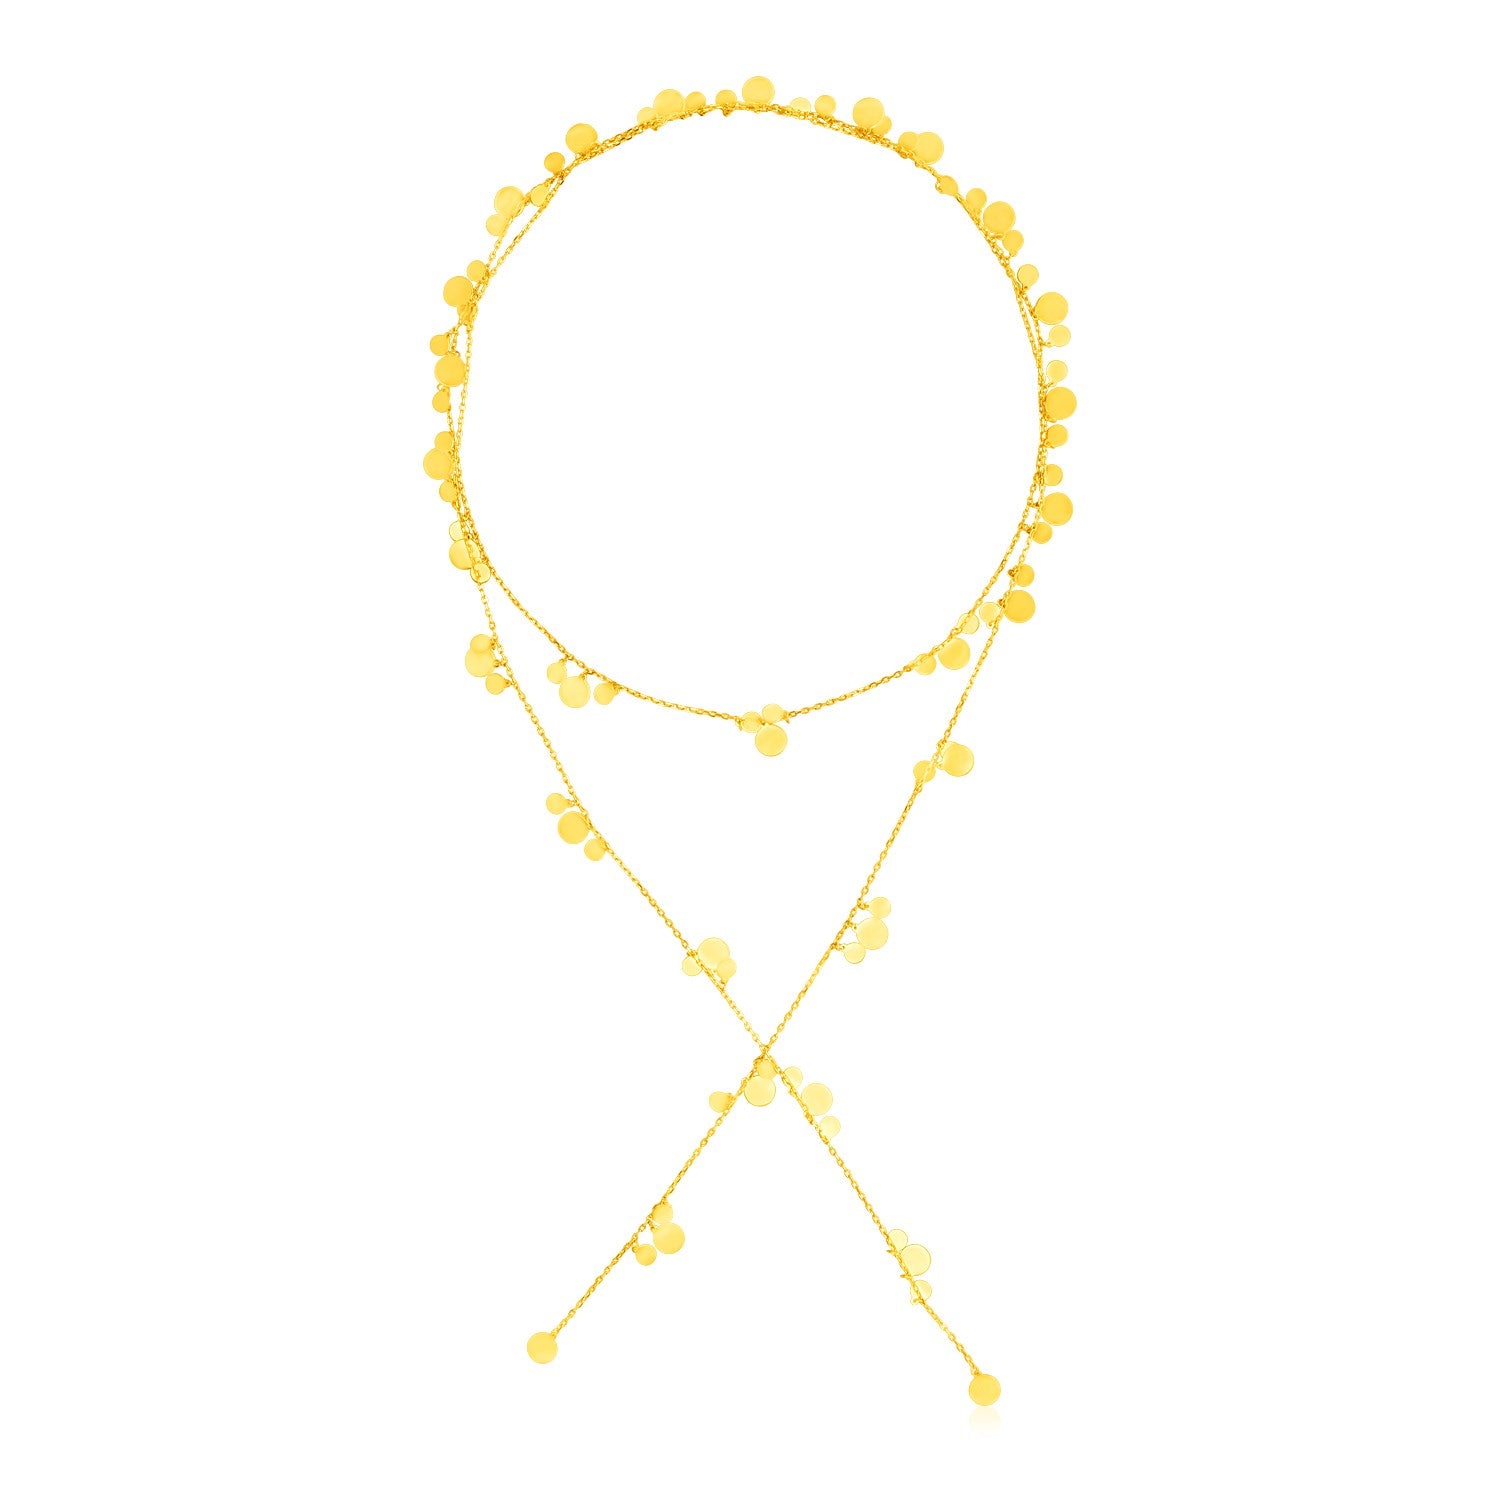 14K Yellow Gold Station Tie Necklace with Polished Circles